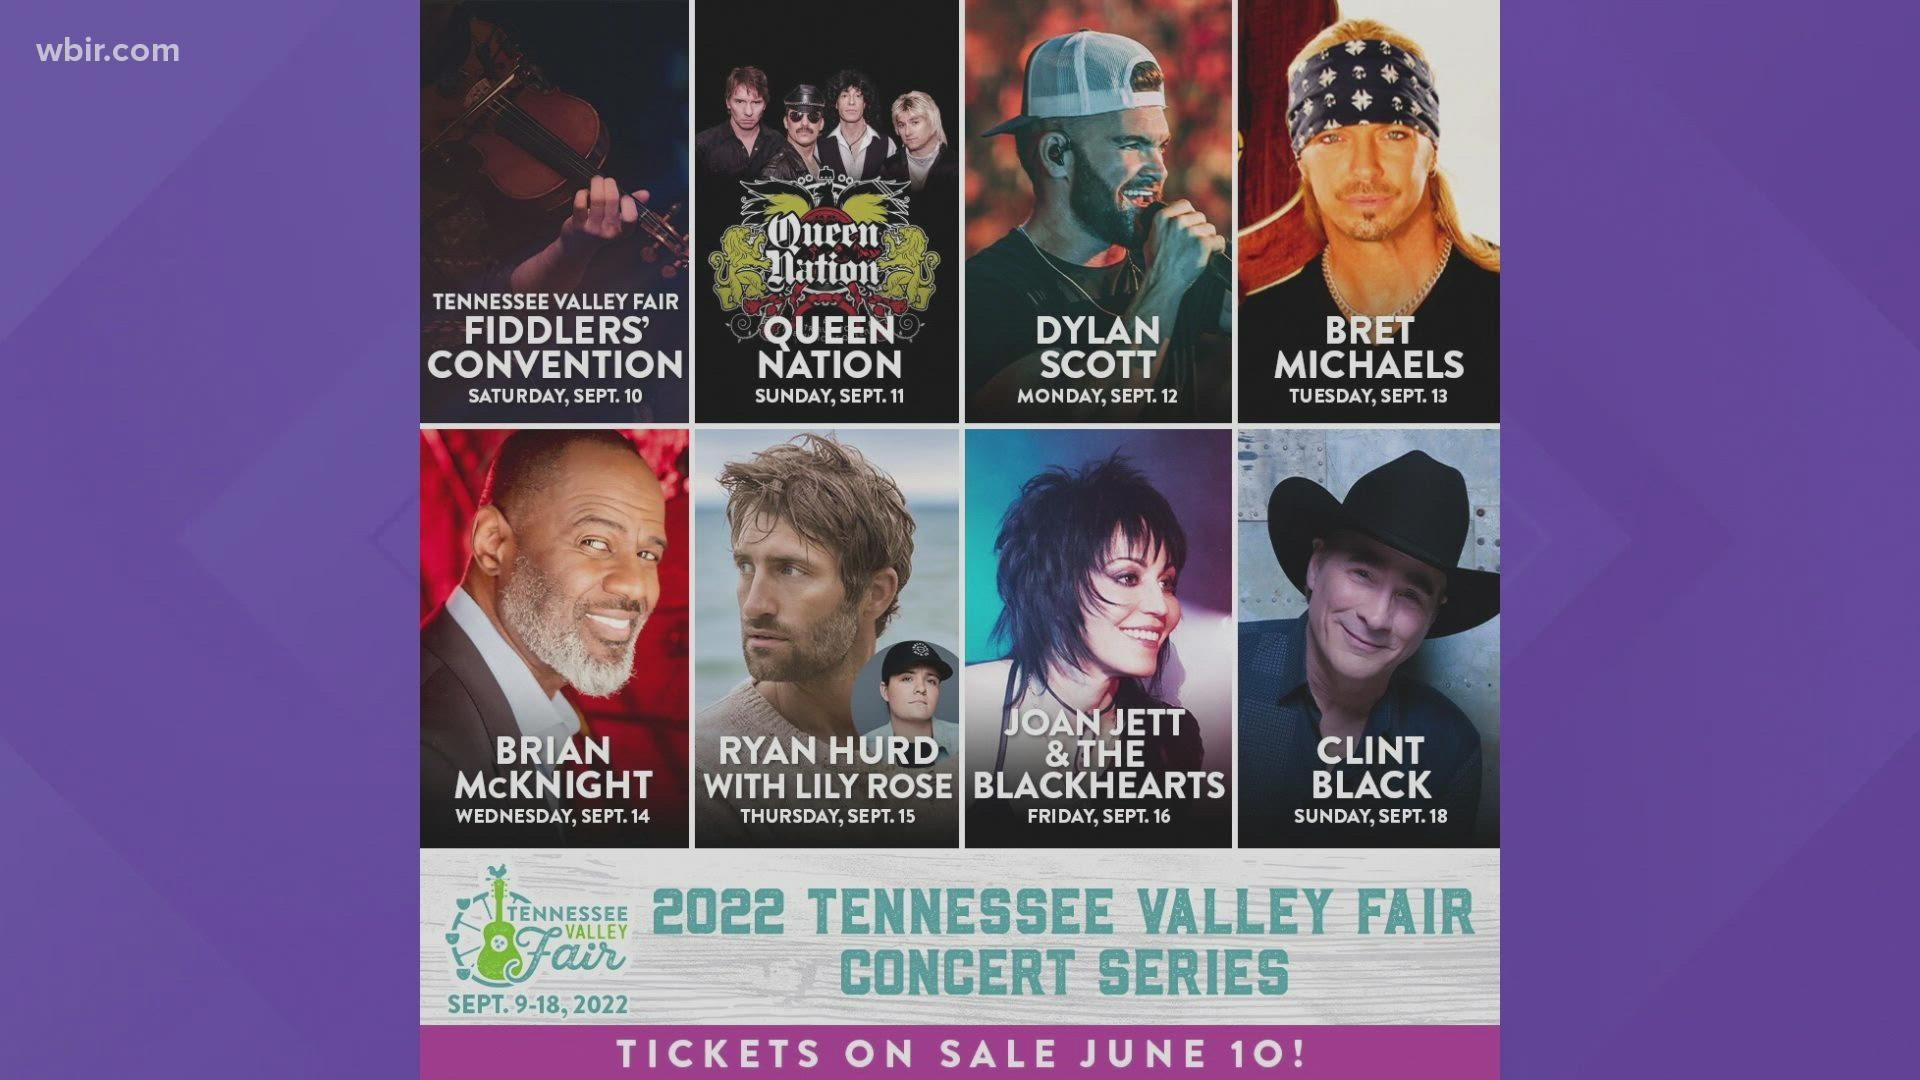 The Tennessee Valley Fair will bring eight days of live music to its festivities beginning on Sept. 10.